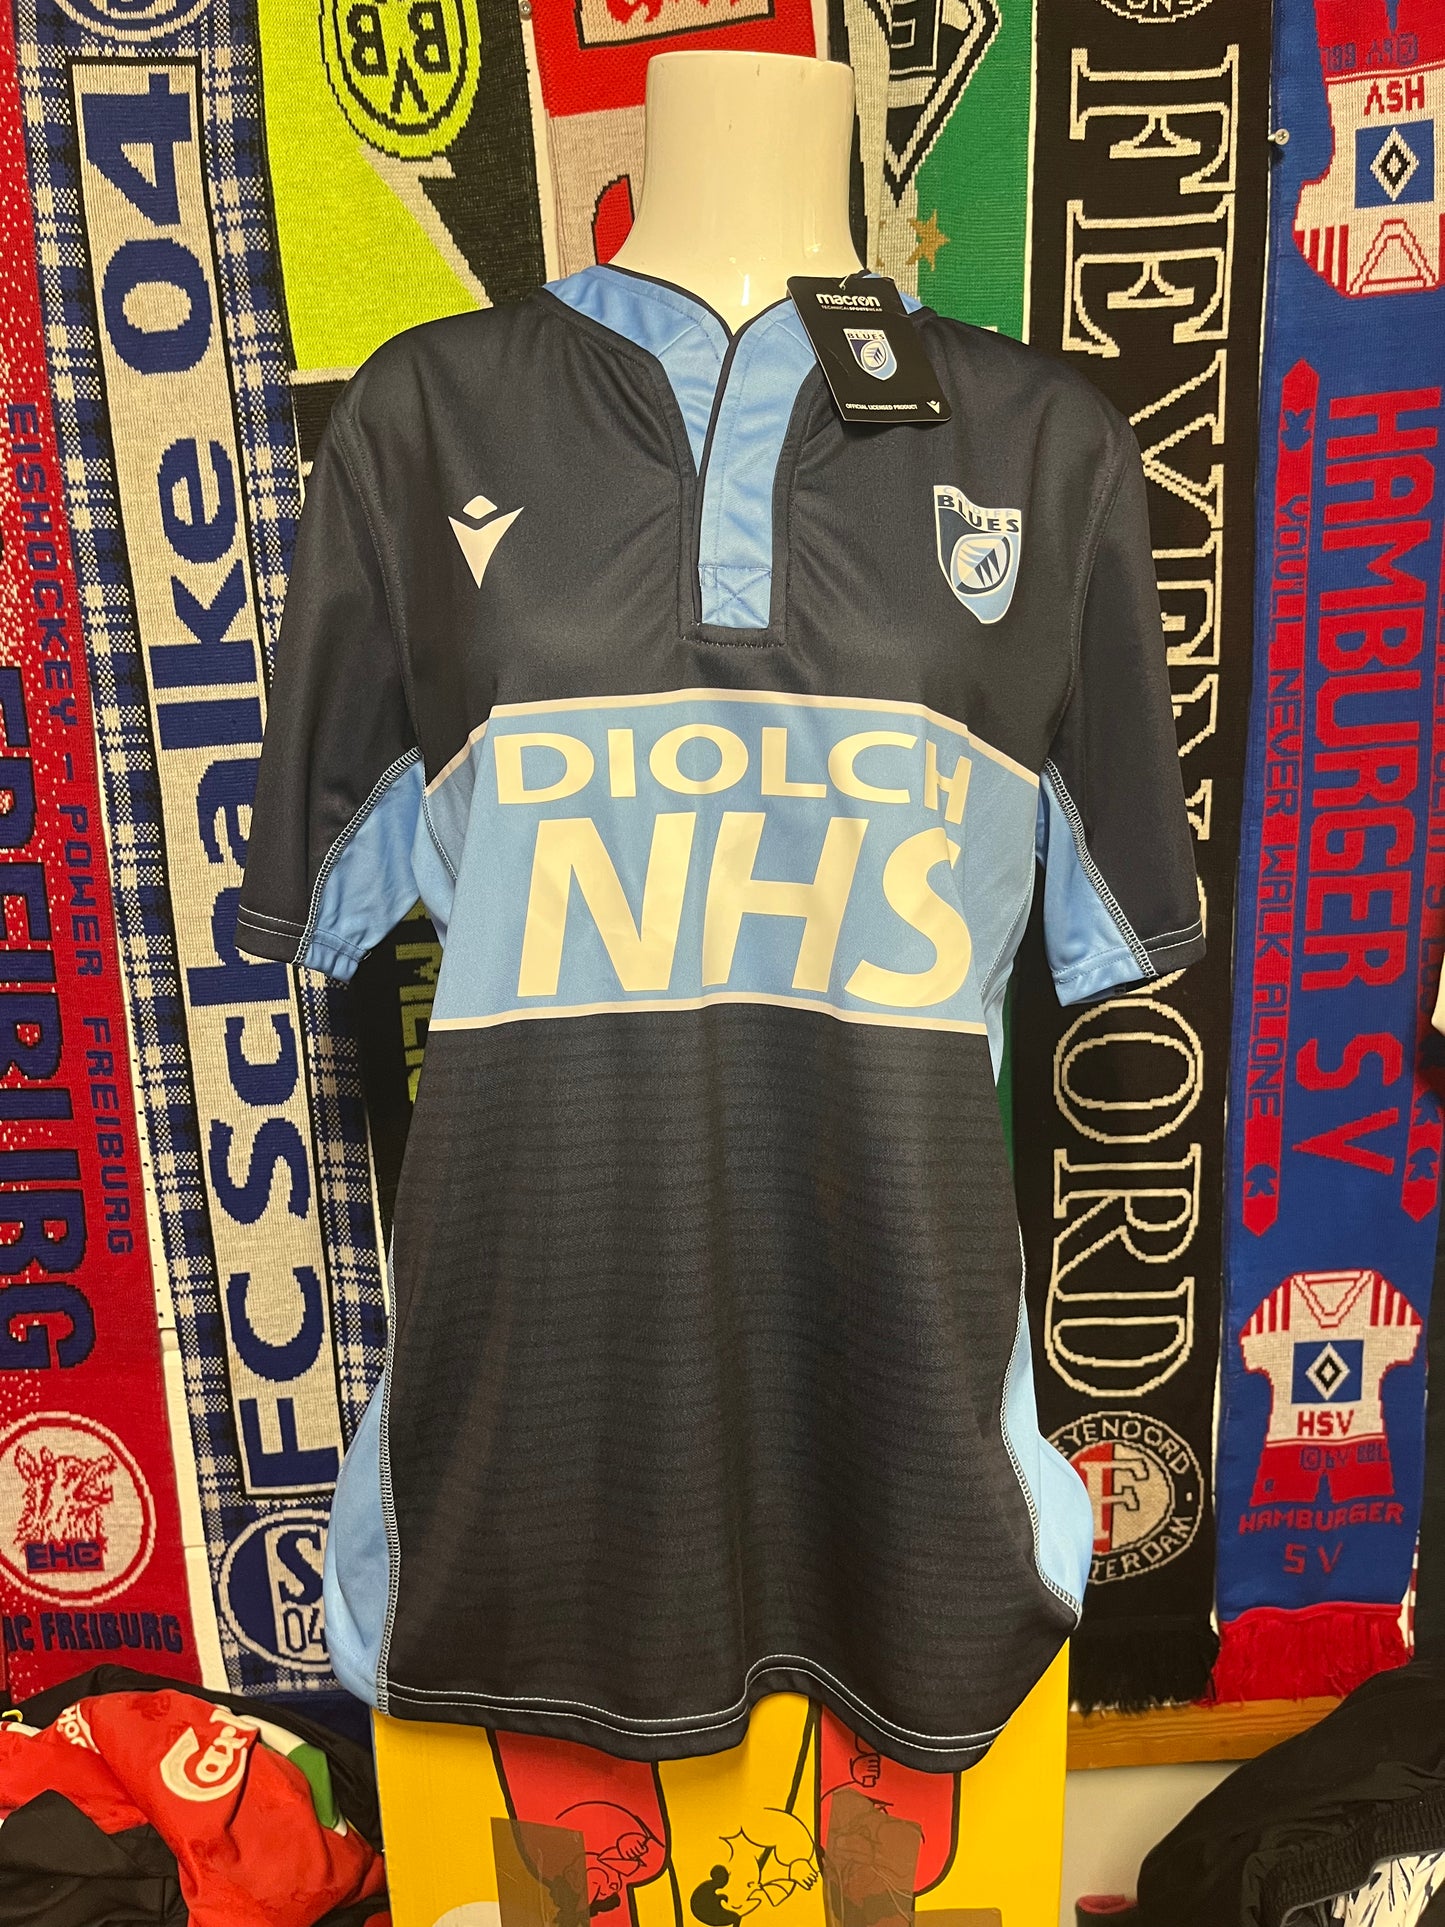 Cardiff Blues “Diolch NHS” Limited Edition L